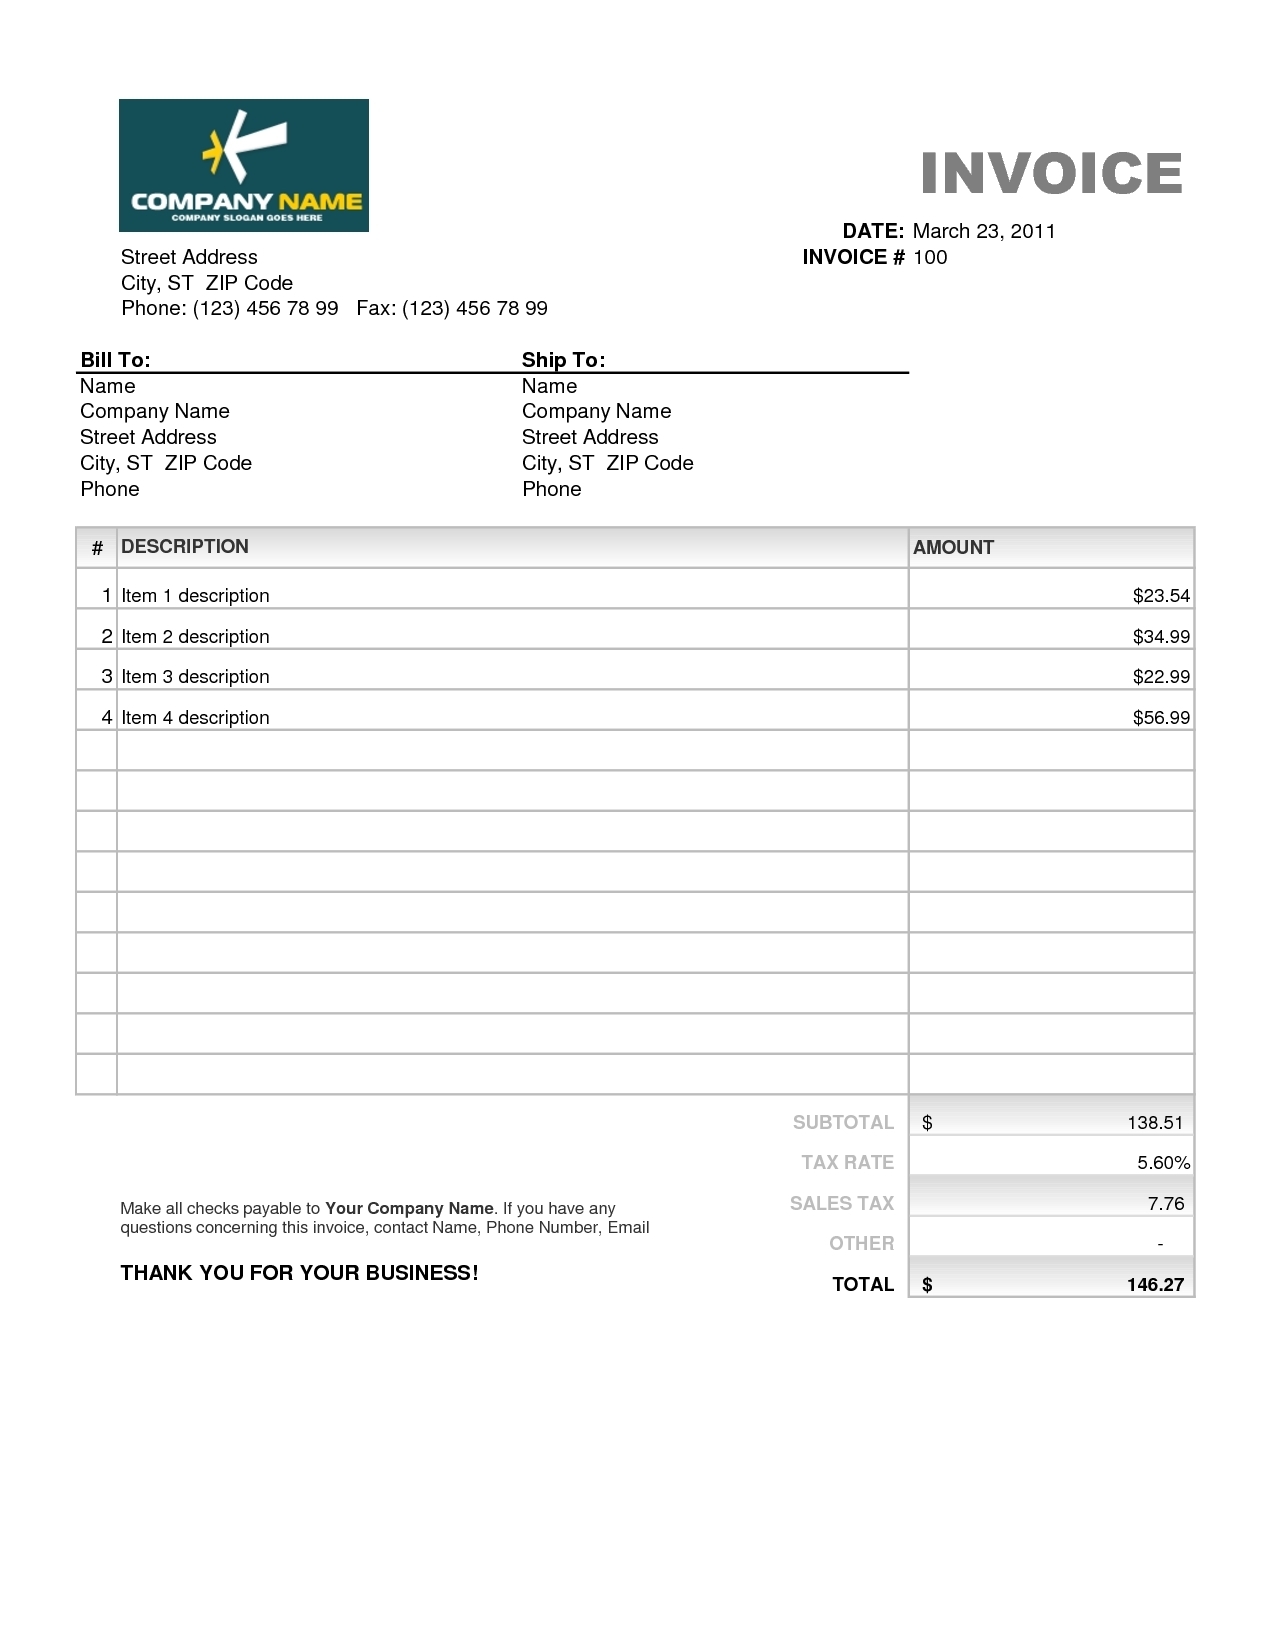 invoice excel template free download invoice template free 2016 free invoice templates to download